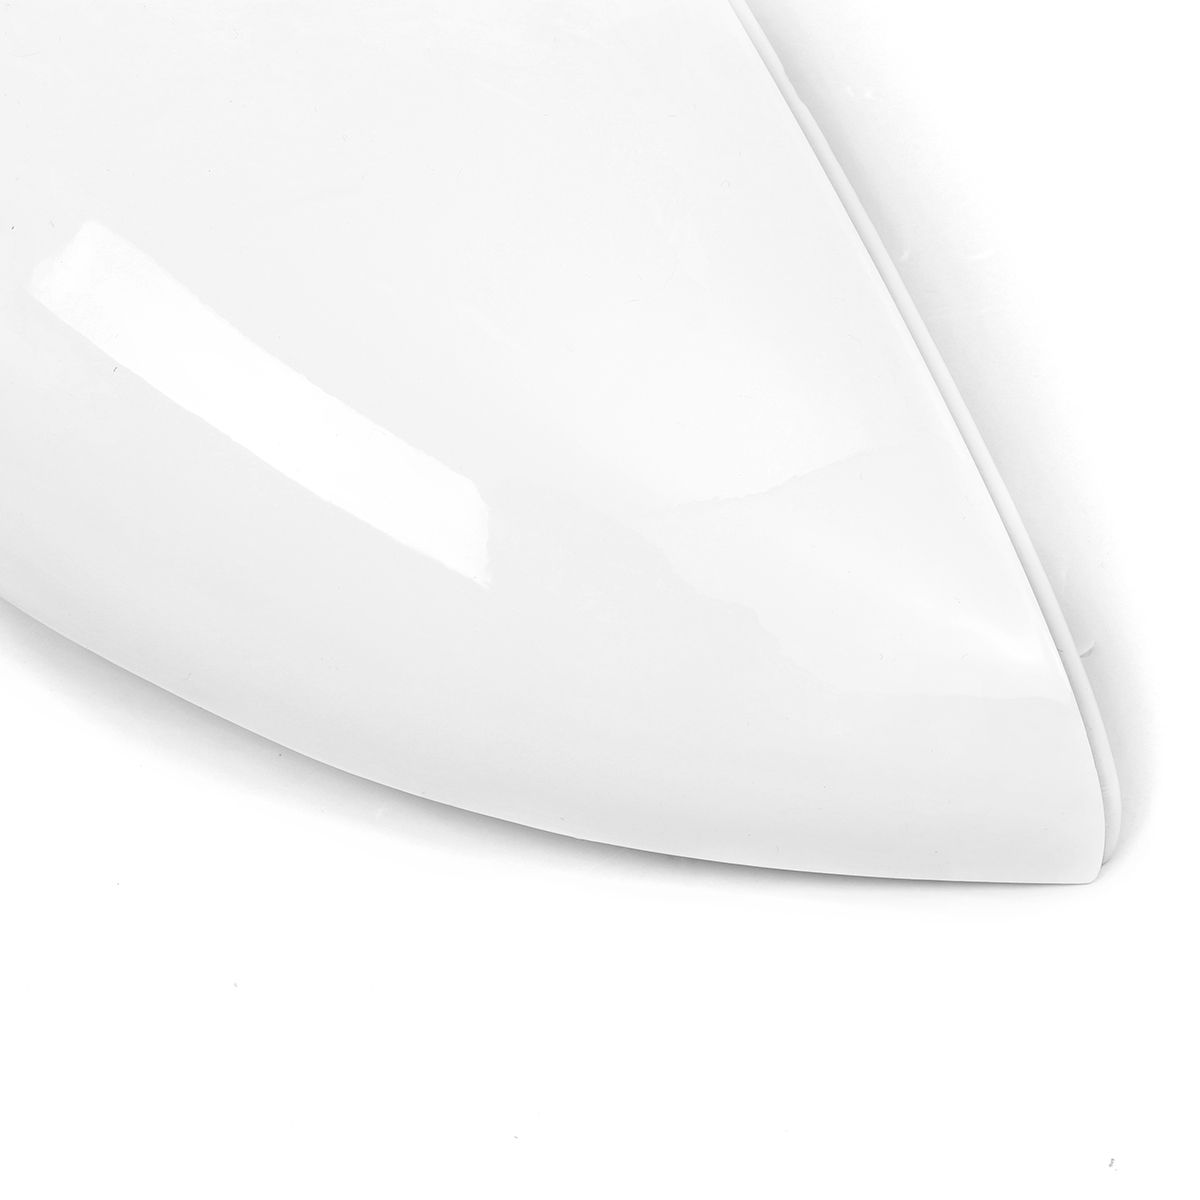 White-Rearview-Side-Mirror-Replacement-Cover-Cap-Case-For-Ford-Fiesta-2008-2017-1716274